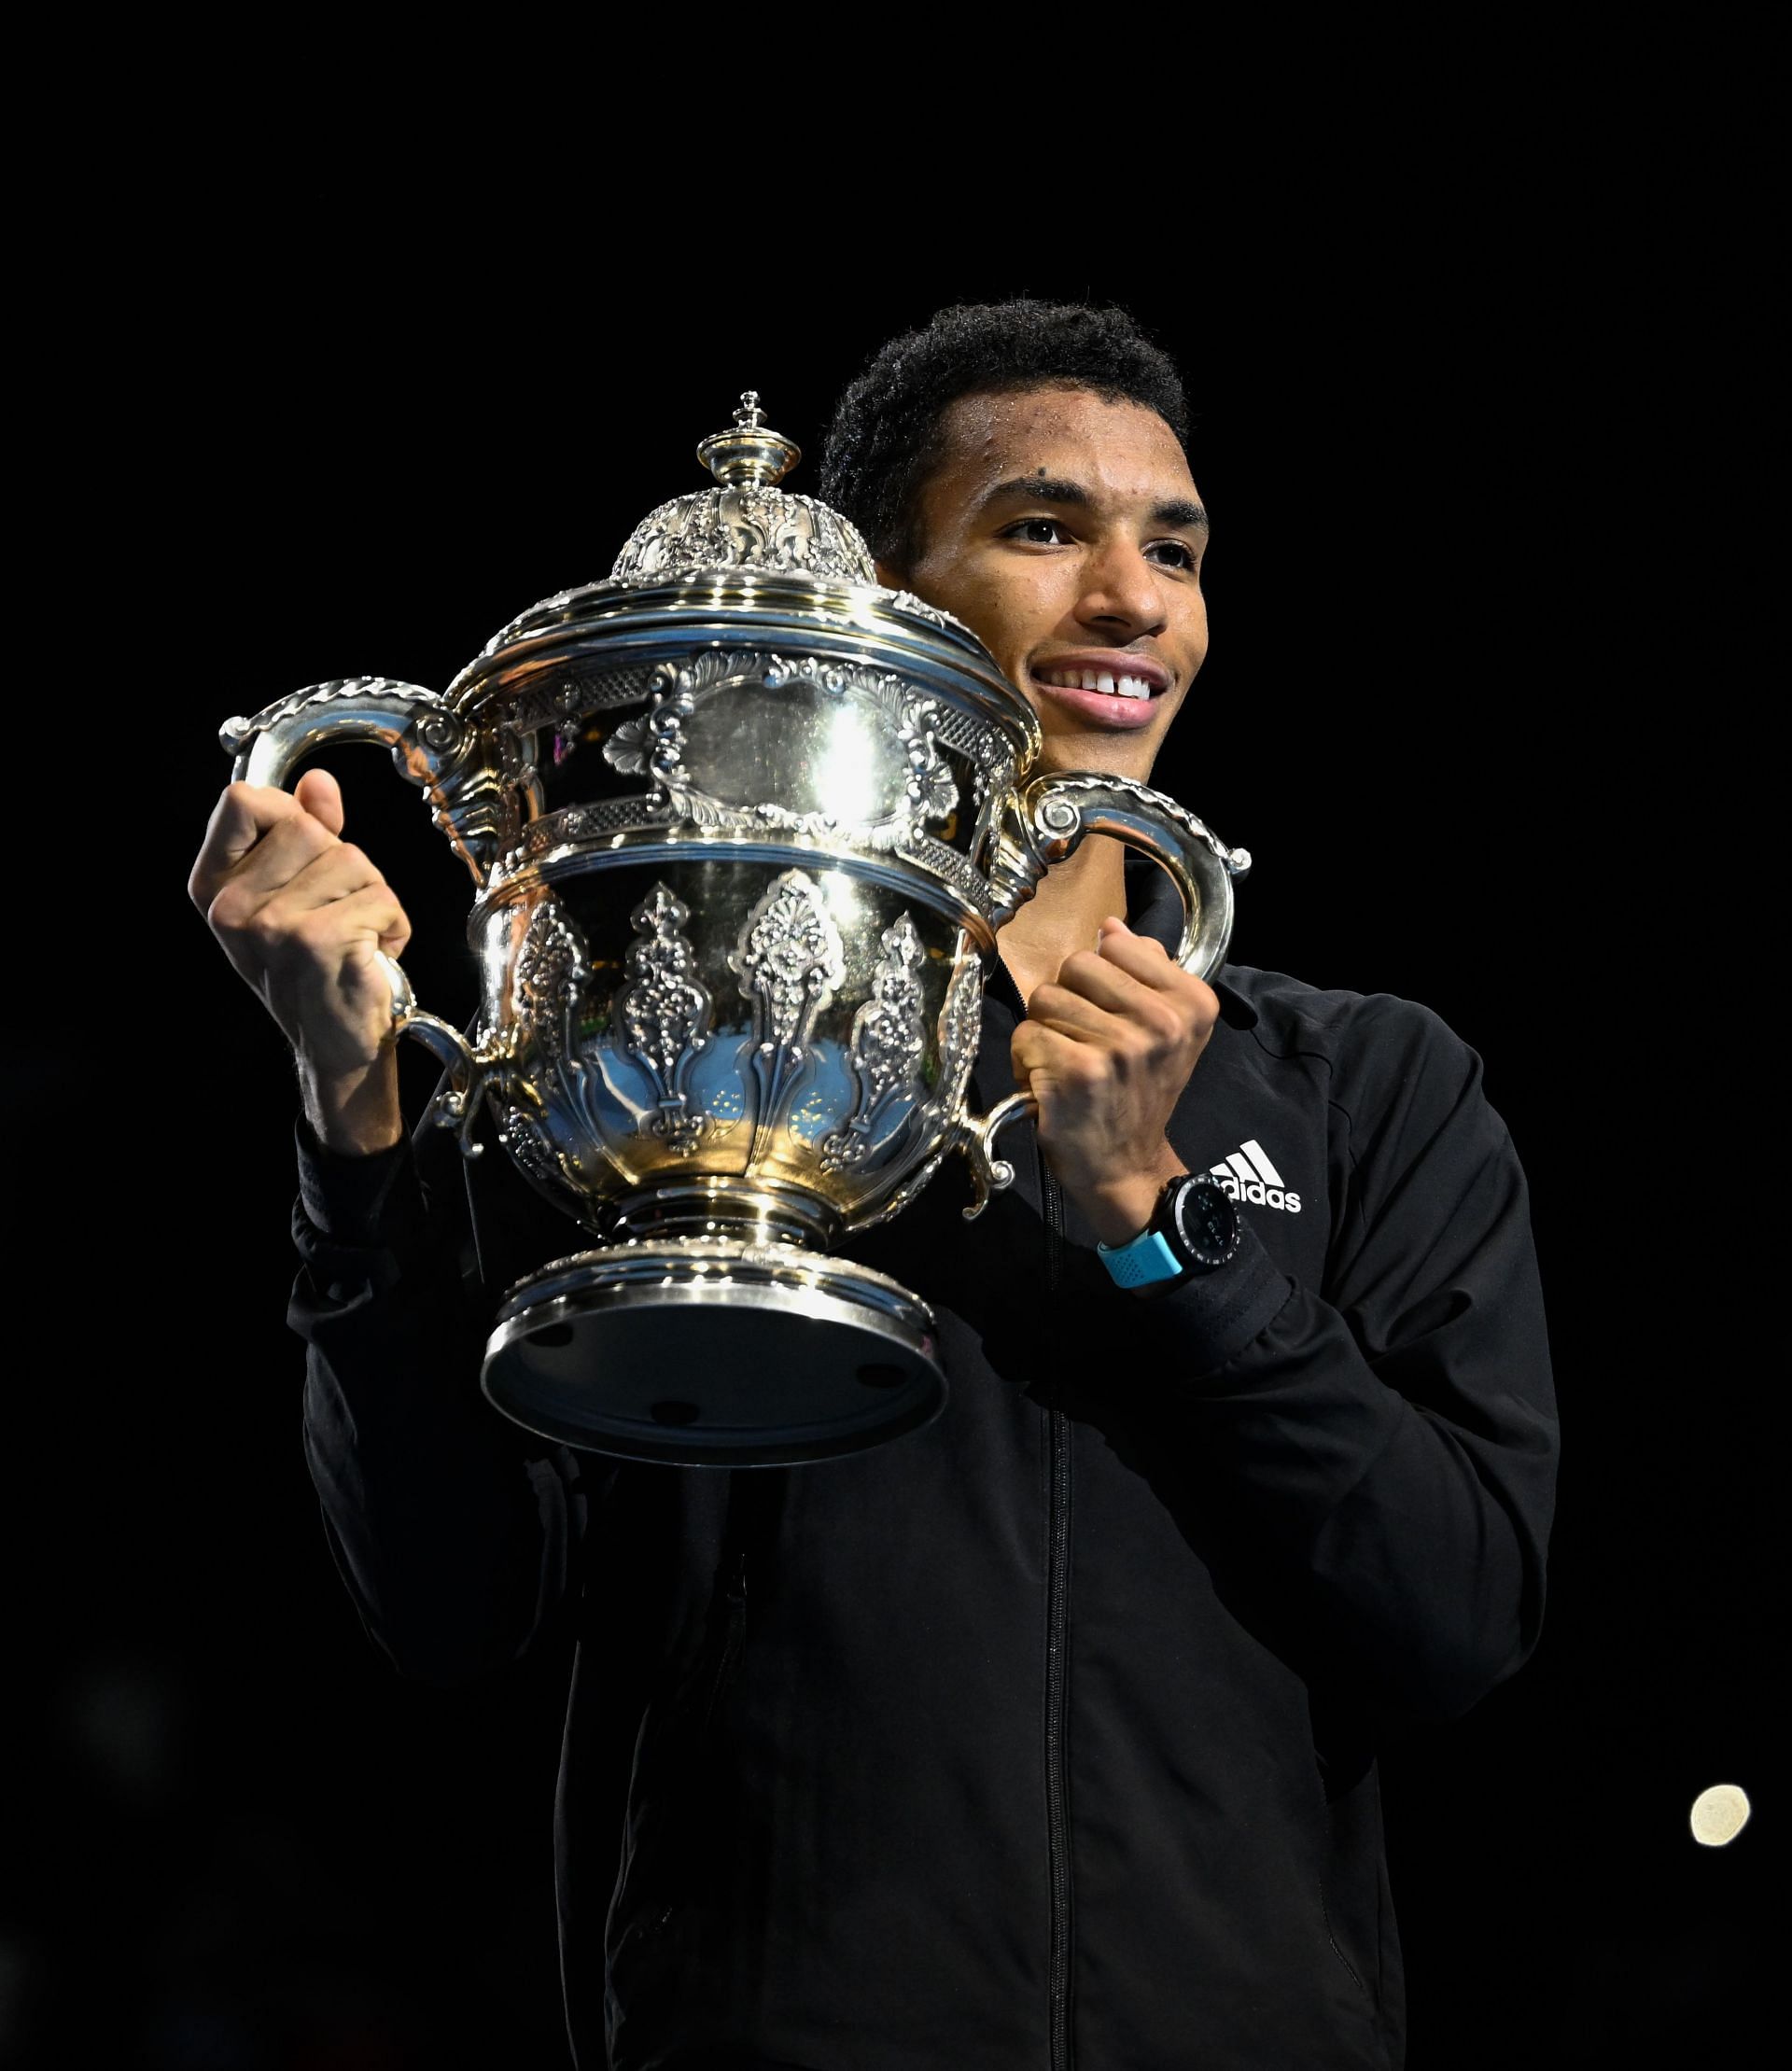 Felix Auger Aliassime with the 2022 Swiss Indoor Basel trophy